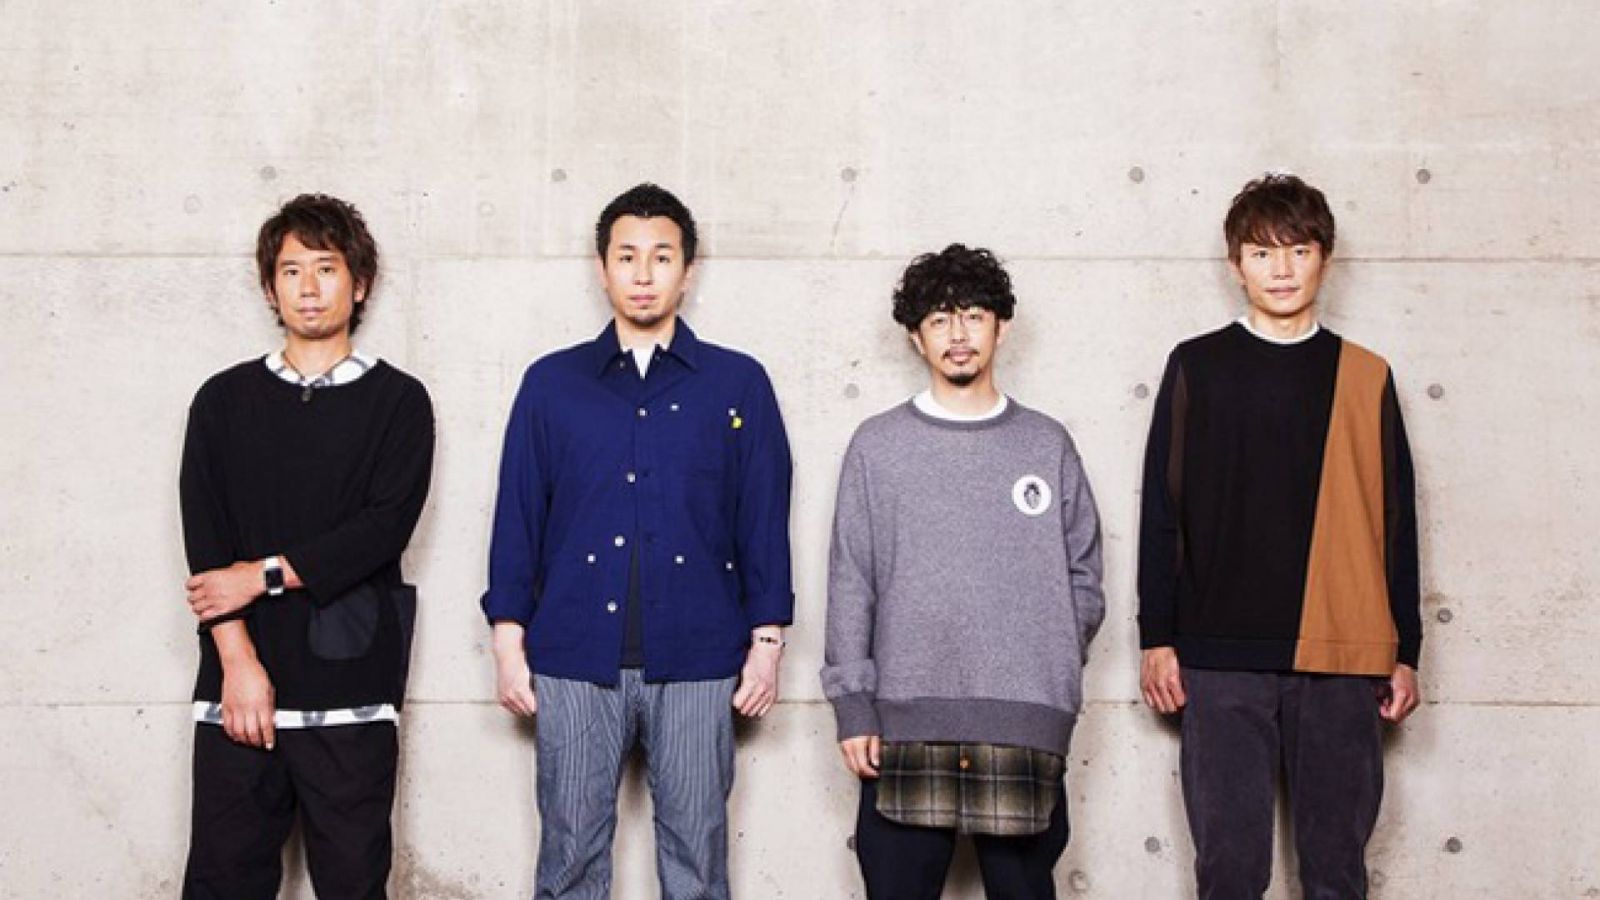 New Single from ASIAN KUNG-FU GENERATION © ASIAN KUNG-FU GENERATION. All rights reserved.